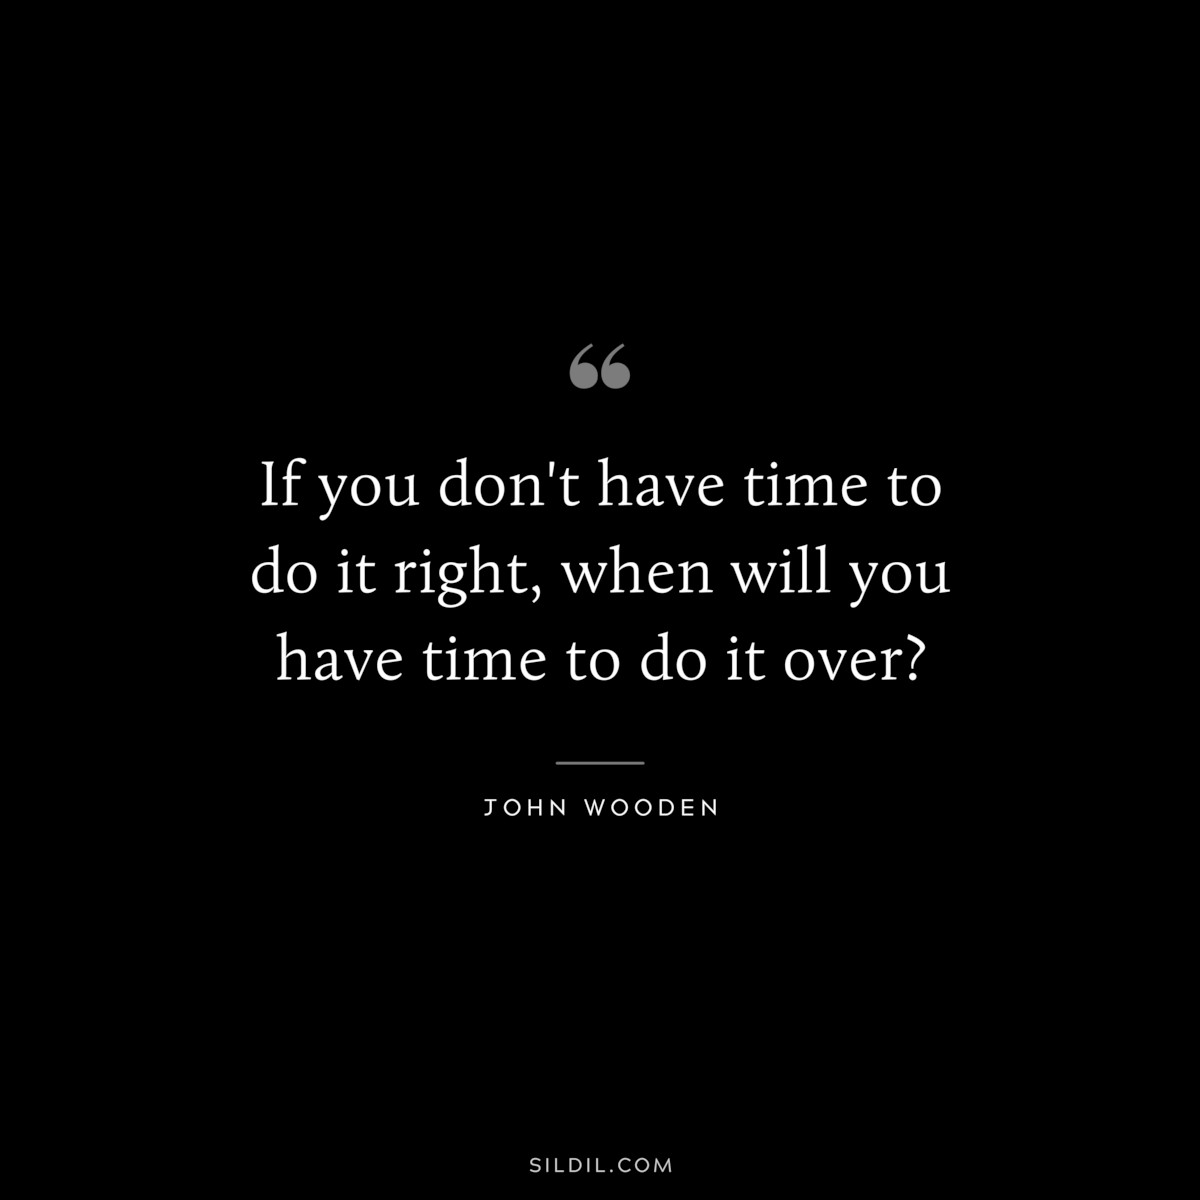 If you don't have time to do it right, when will you have time to do it over? ― John Wooden